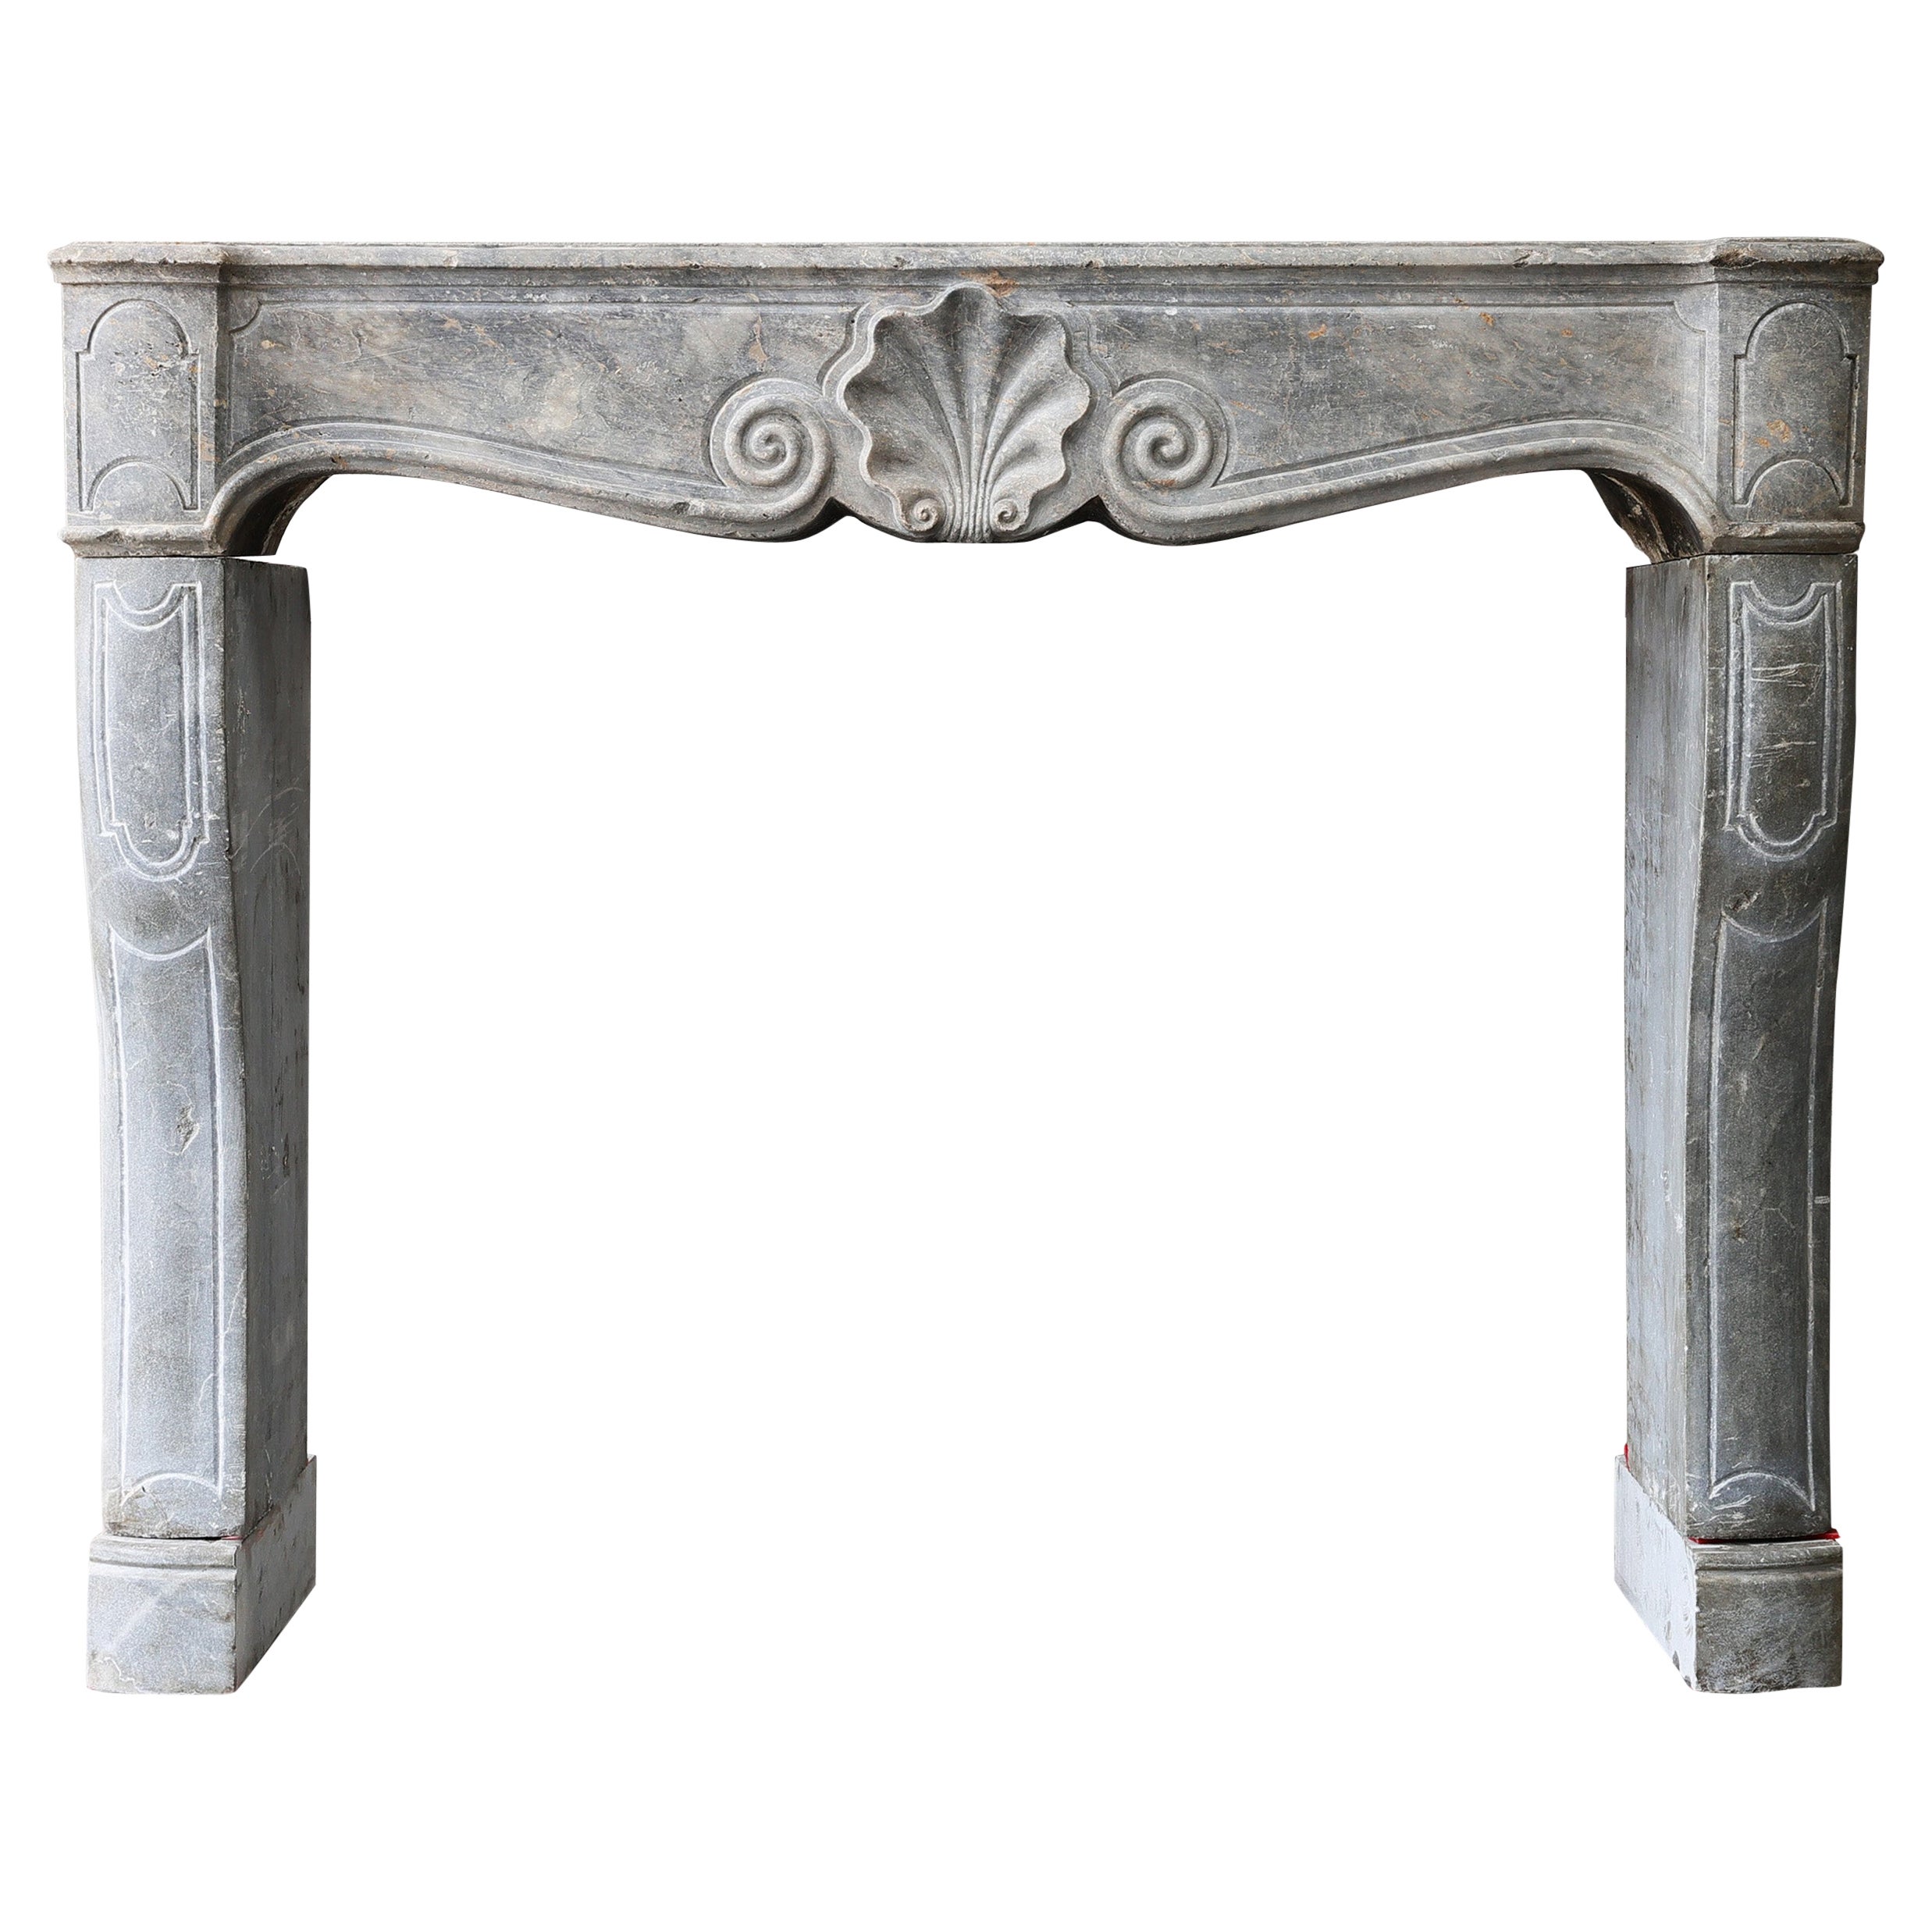 Antique Mantle of gray marble stone in style of Louis XV